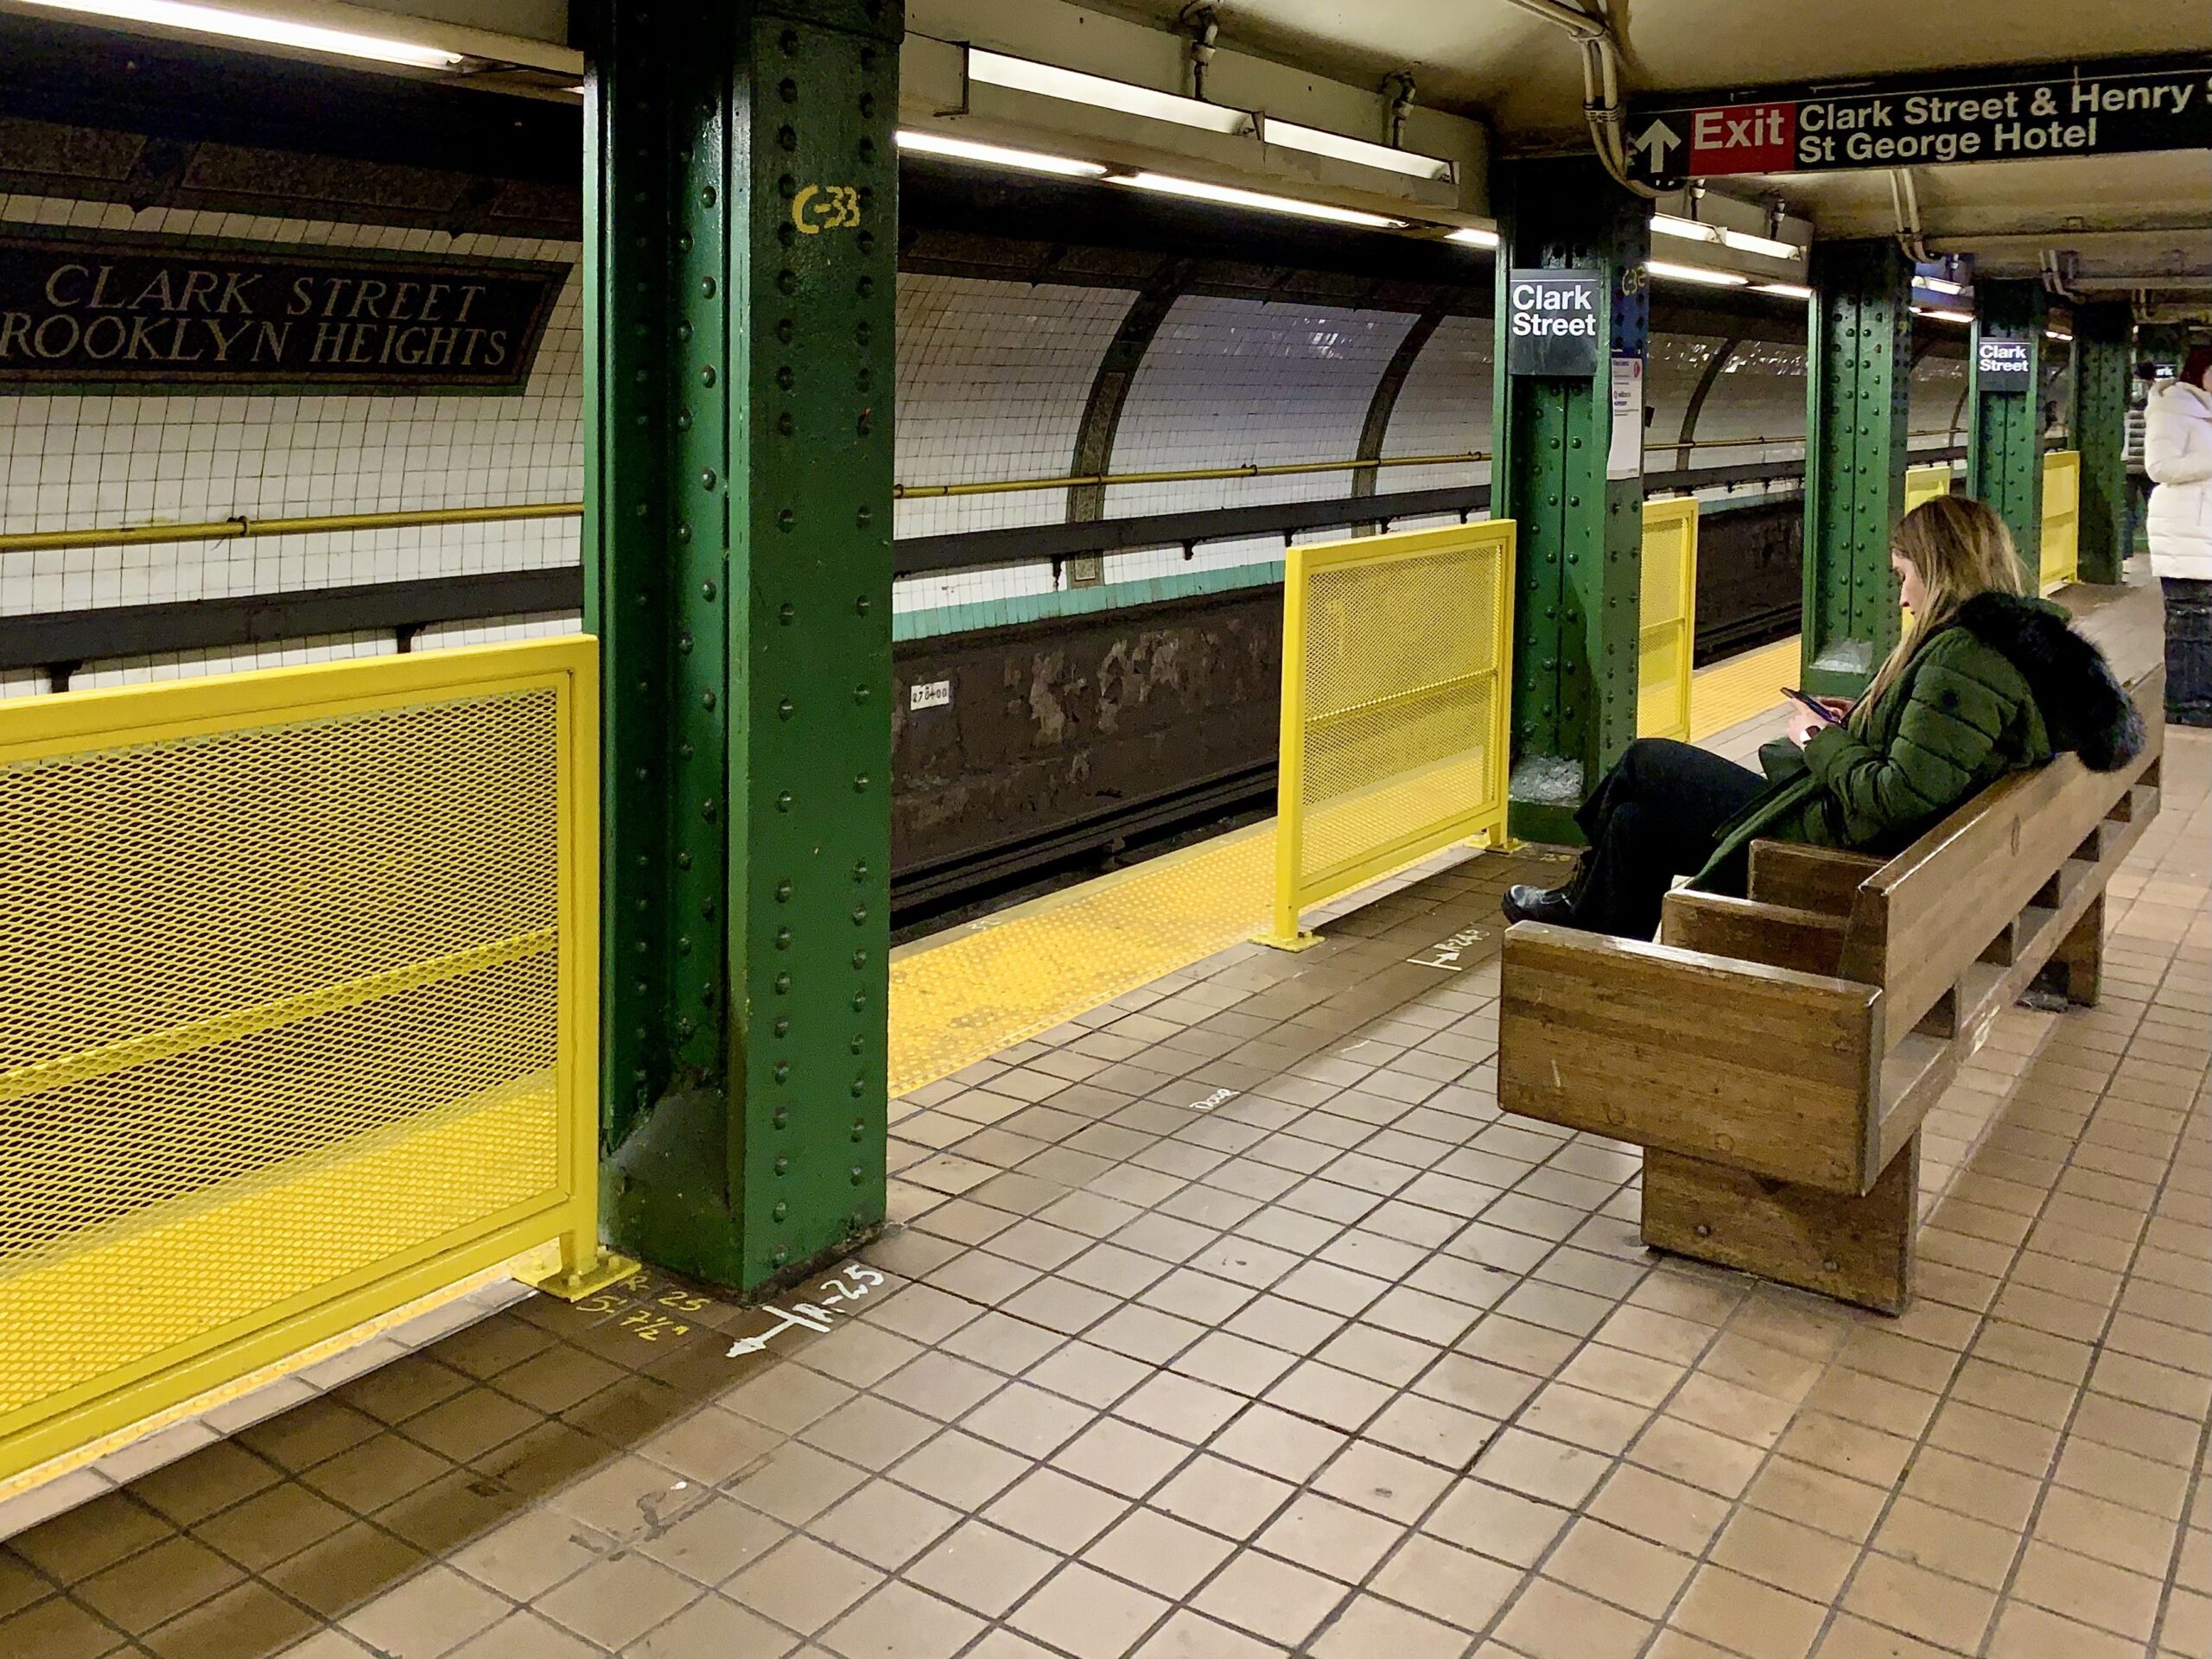 New safety barriers were installed on the platform in the Clark Street 2 and 3 subway station in Brooklyn Heights.